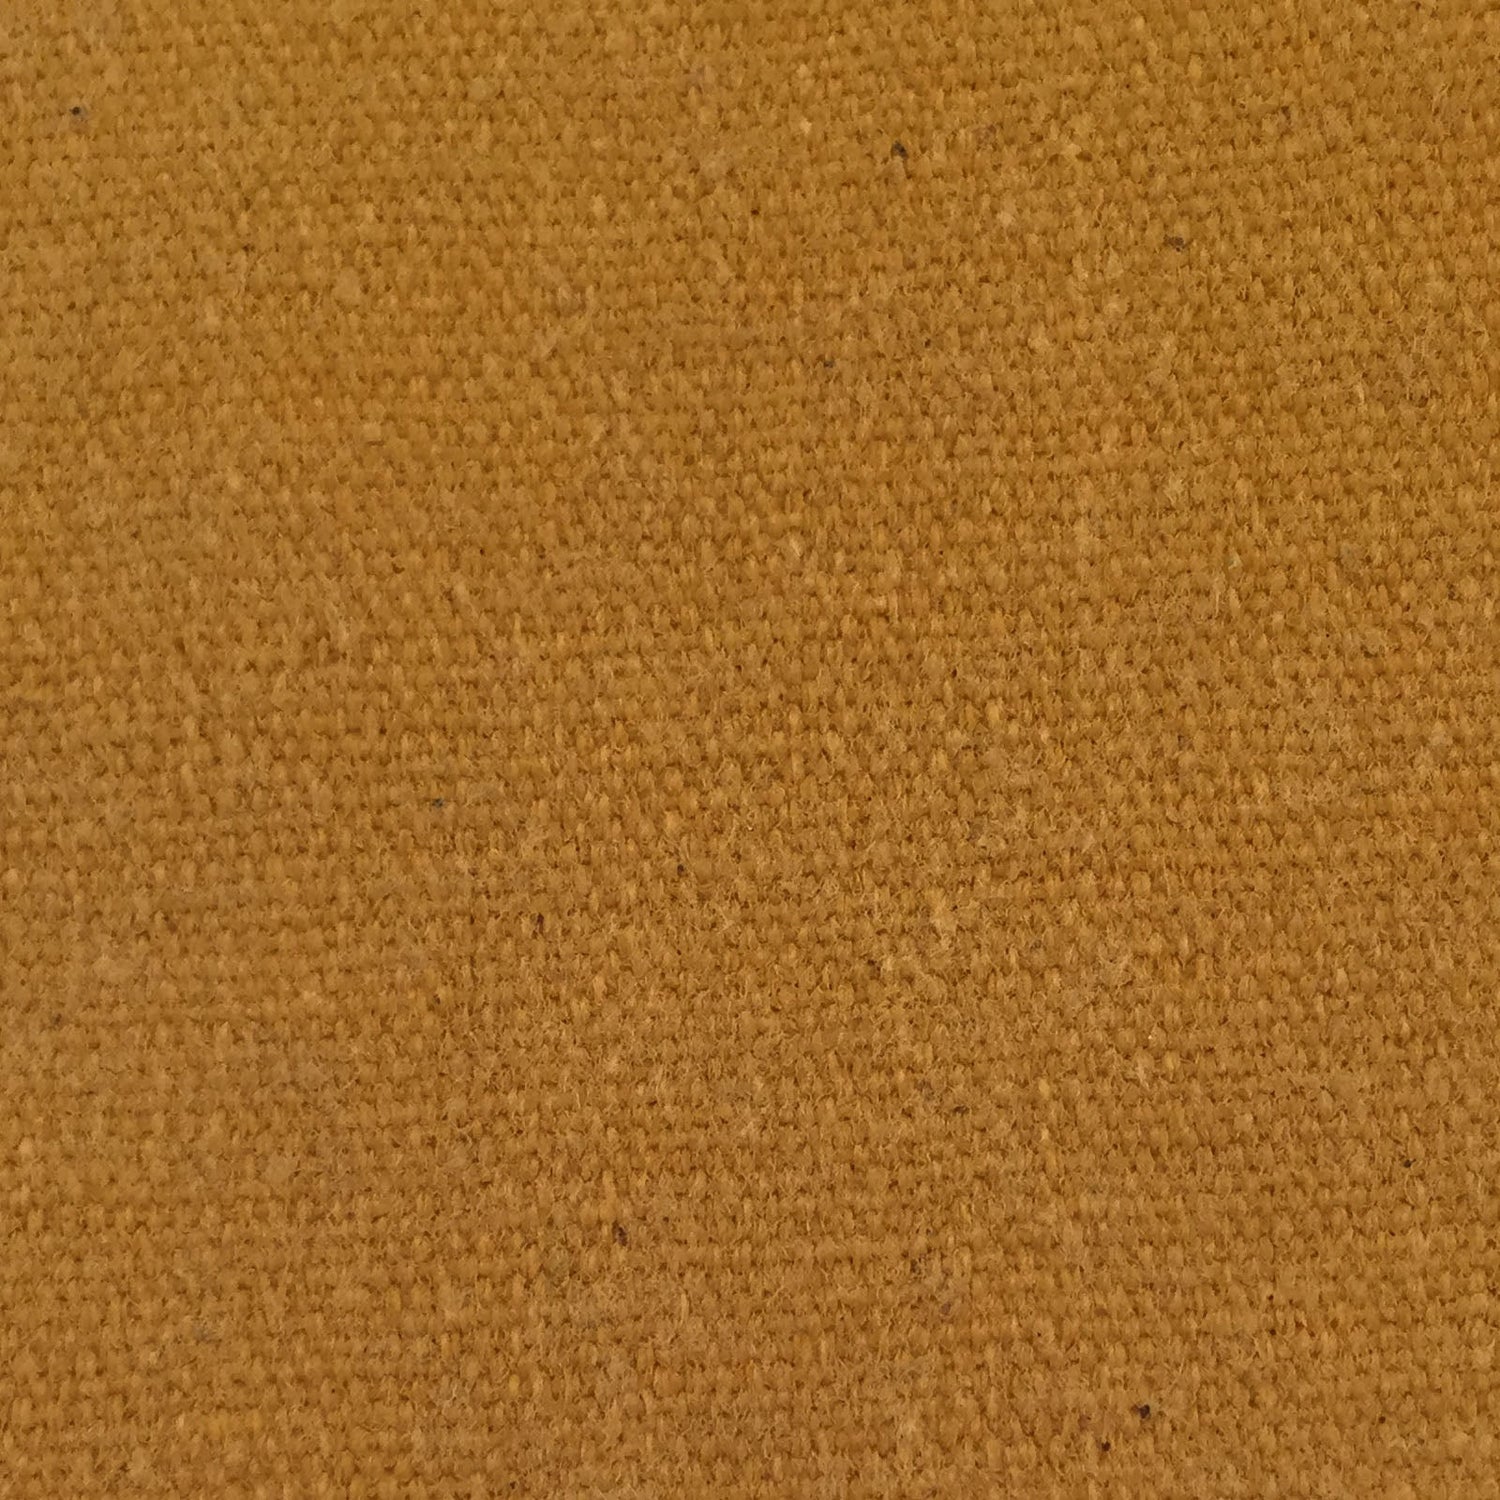 16 oz Canvas Treated Water Resistant Fabric [60" x 25 Yards]